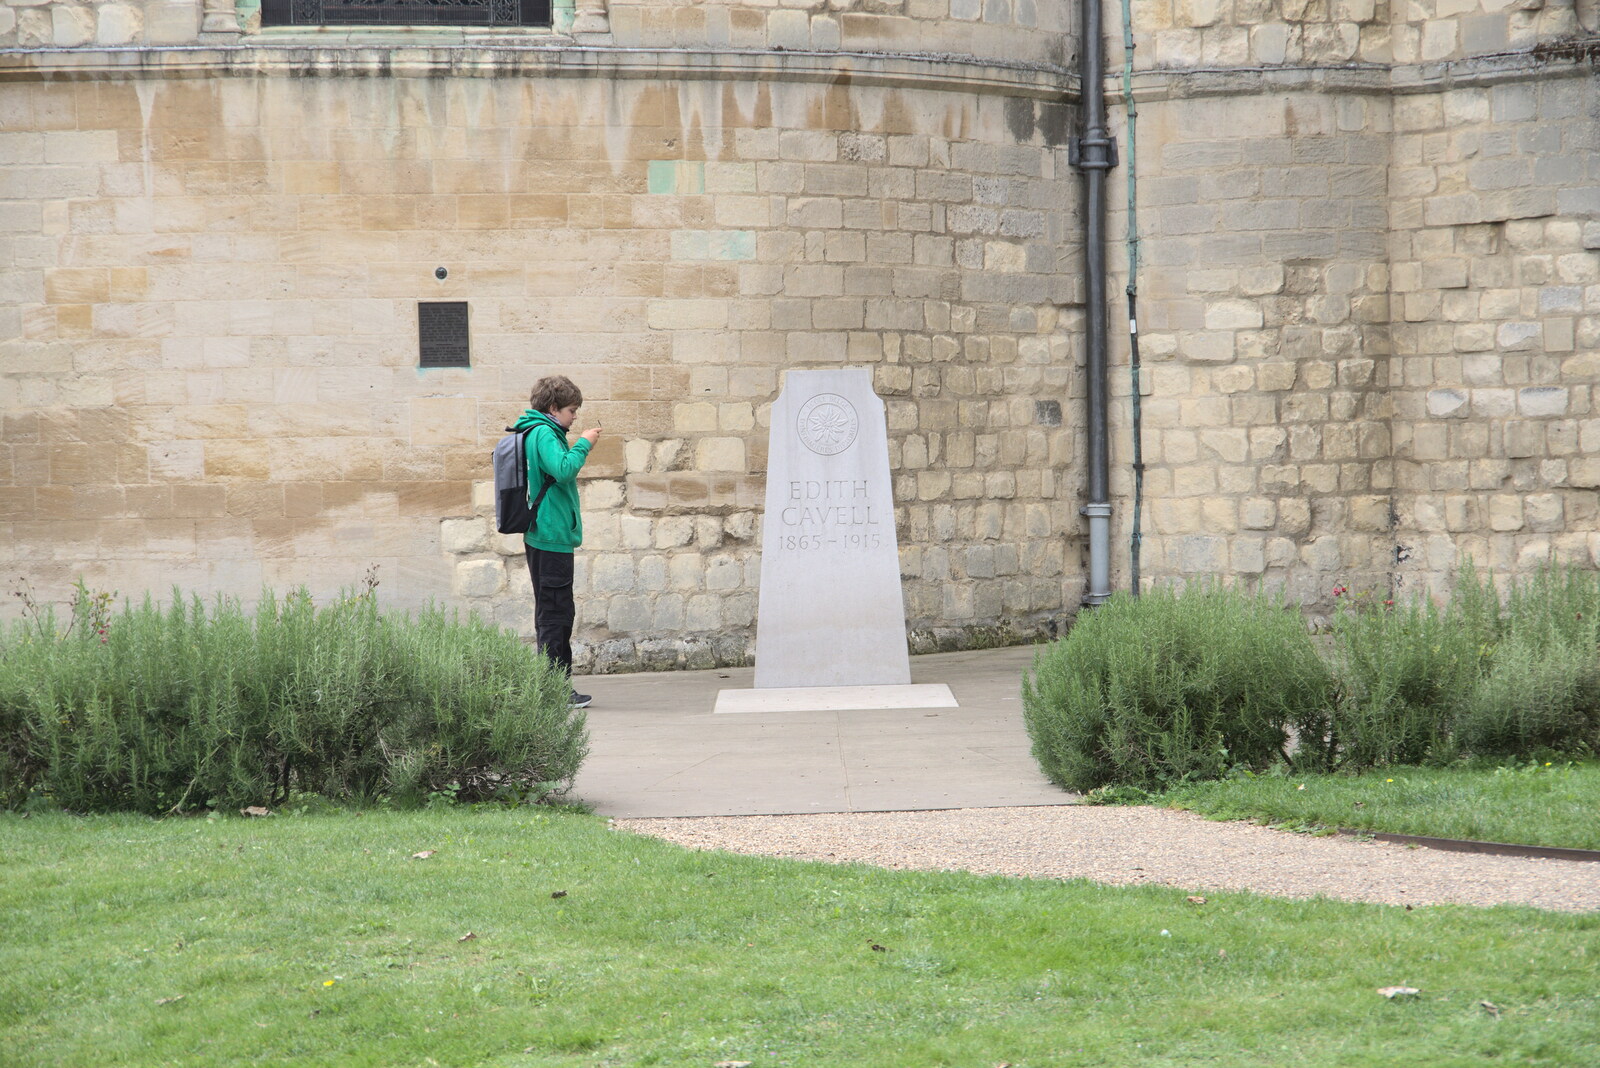 Fred gets a photo of Edith Cavell's grave from Dippy and the City Dinosaur Trail, Norwich, Norfolk - 19th August 2021